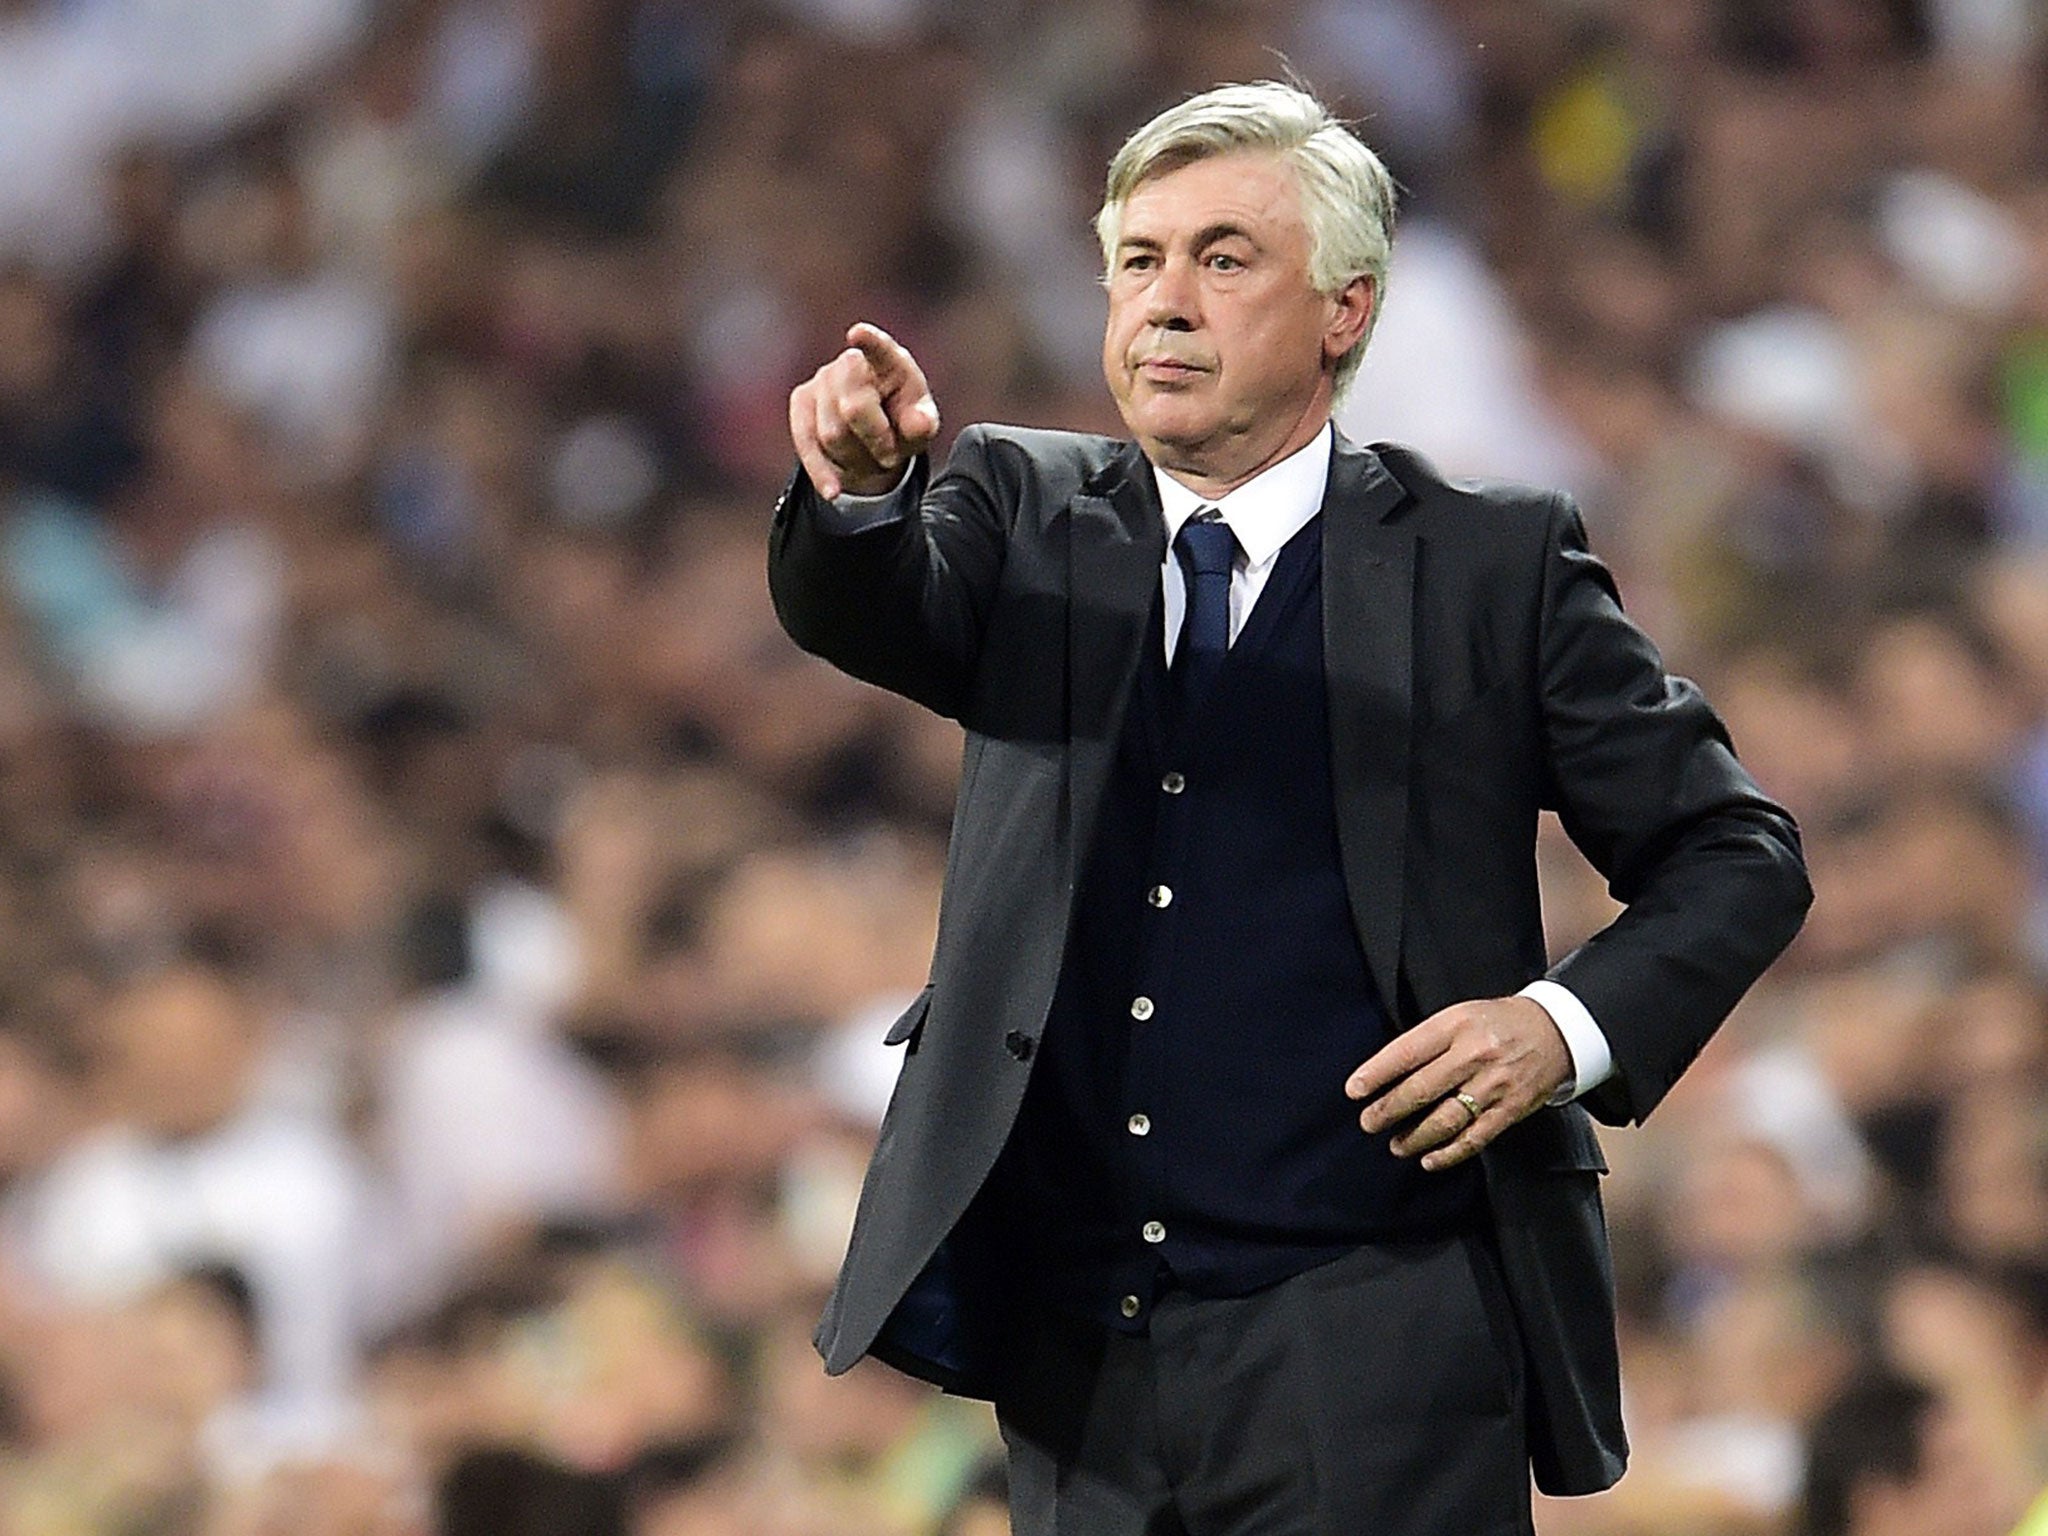 Former Real Madrid manager Carlo Ancelotti